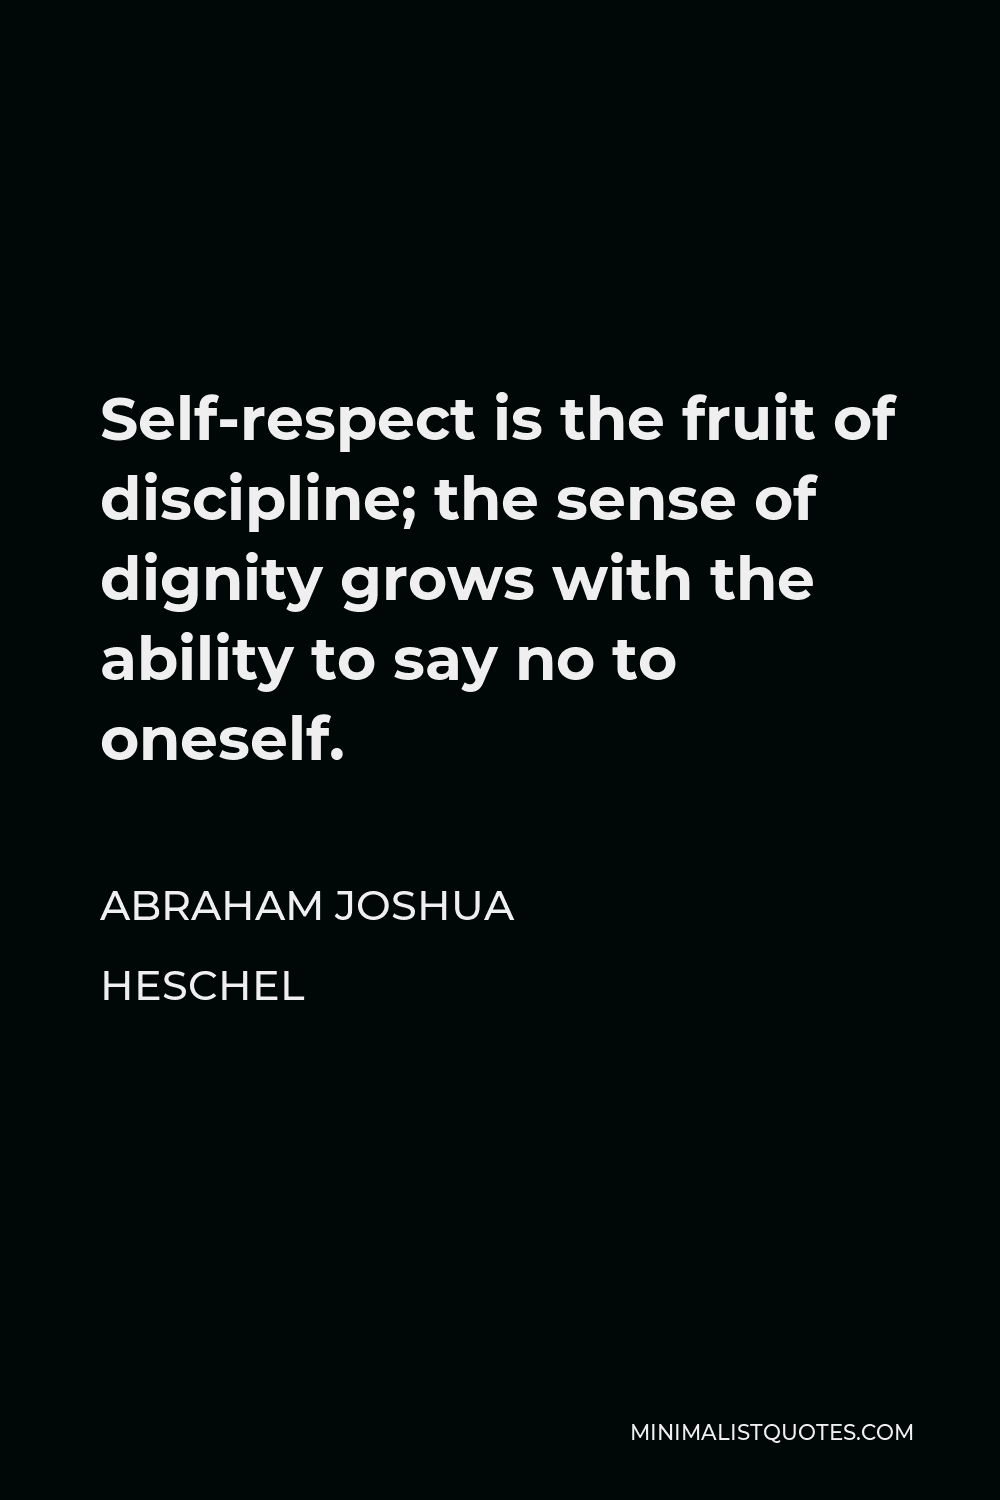 Abraham Joshua Heschel Quote - Self-respect is the fruit of discipline; the sense of dignity grows with the ability to say no to oneself.